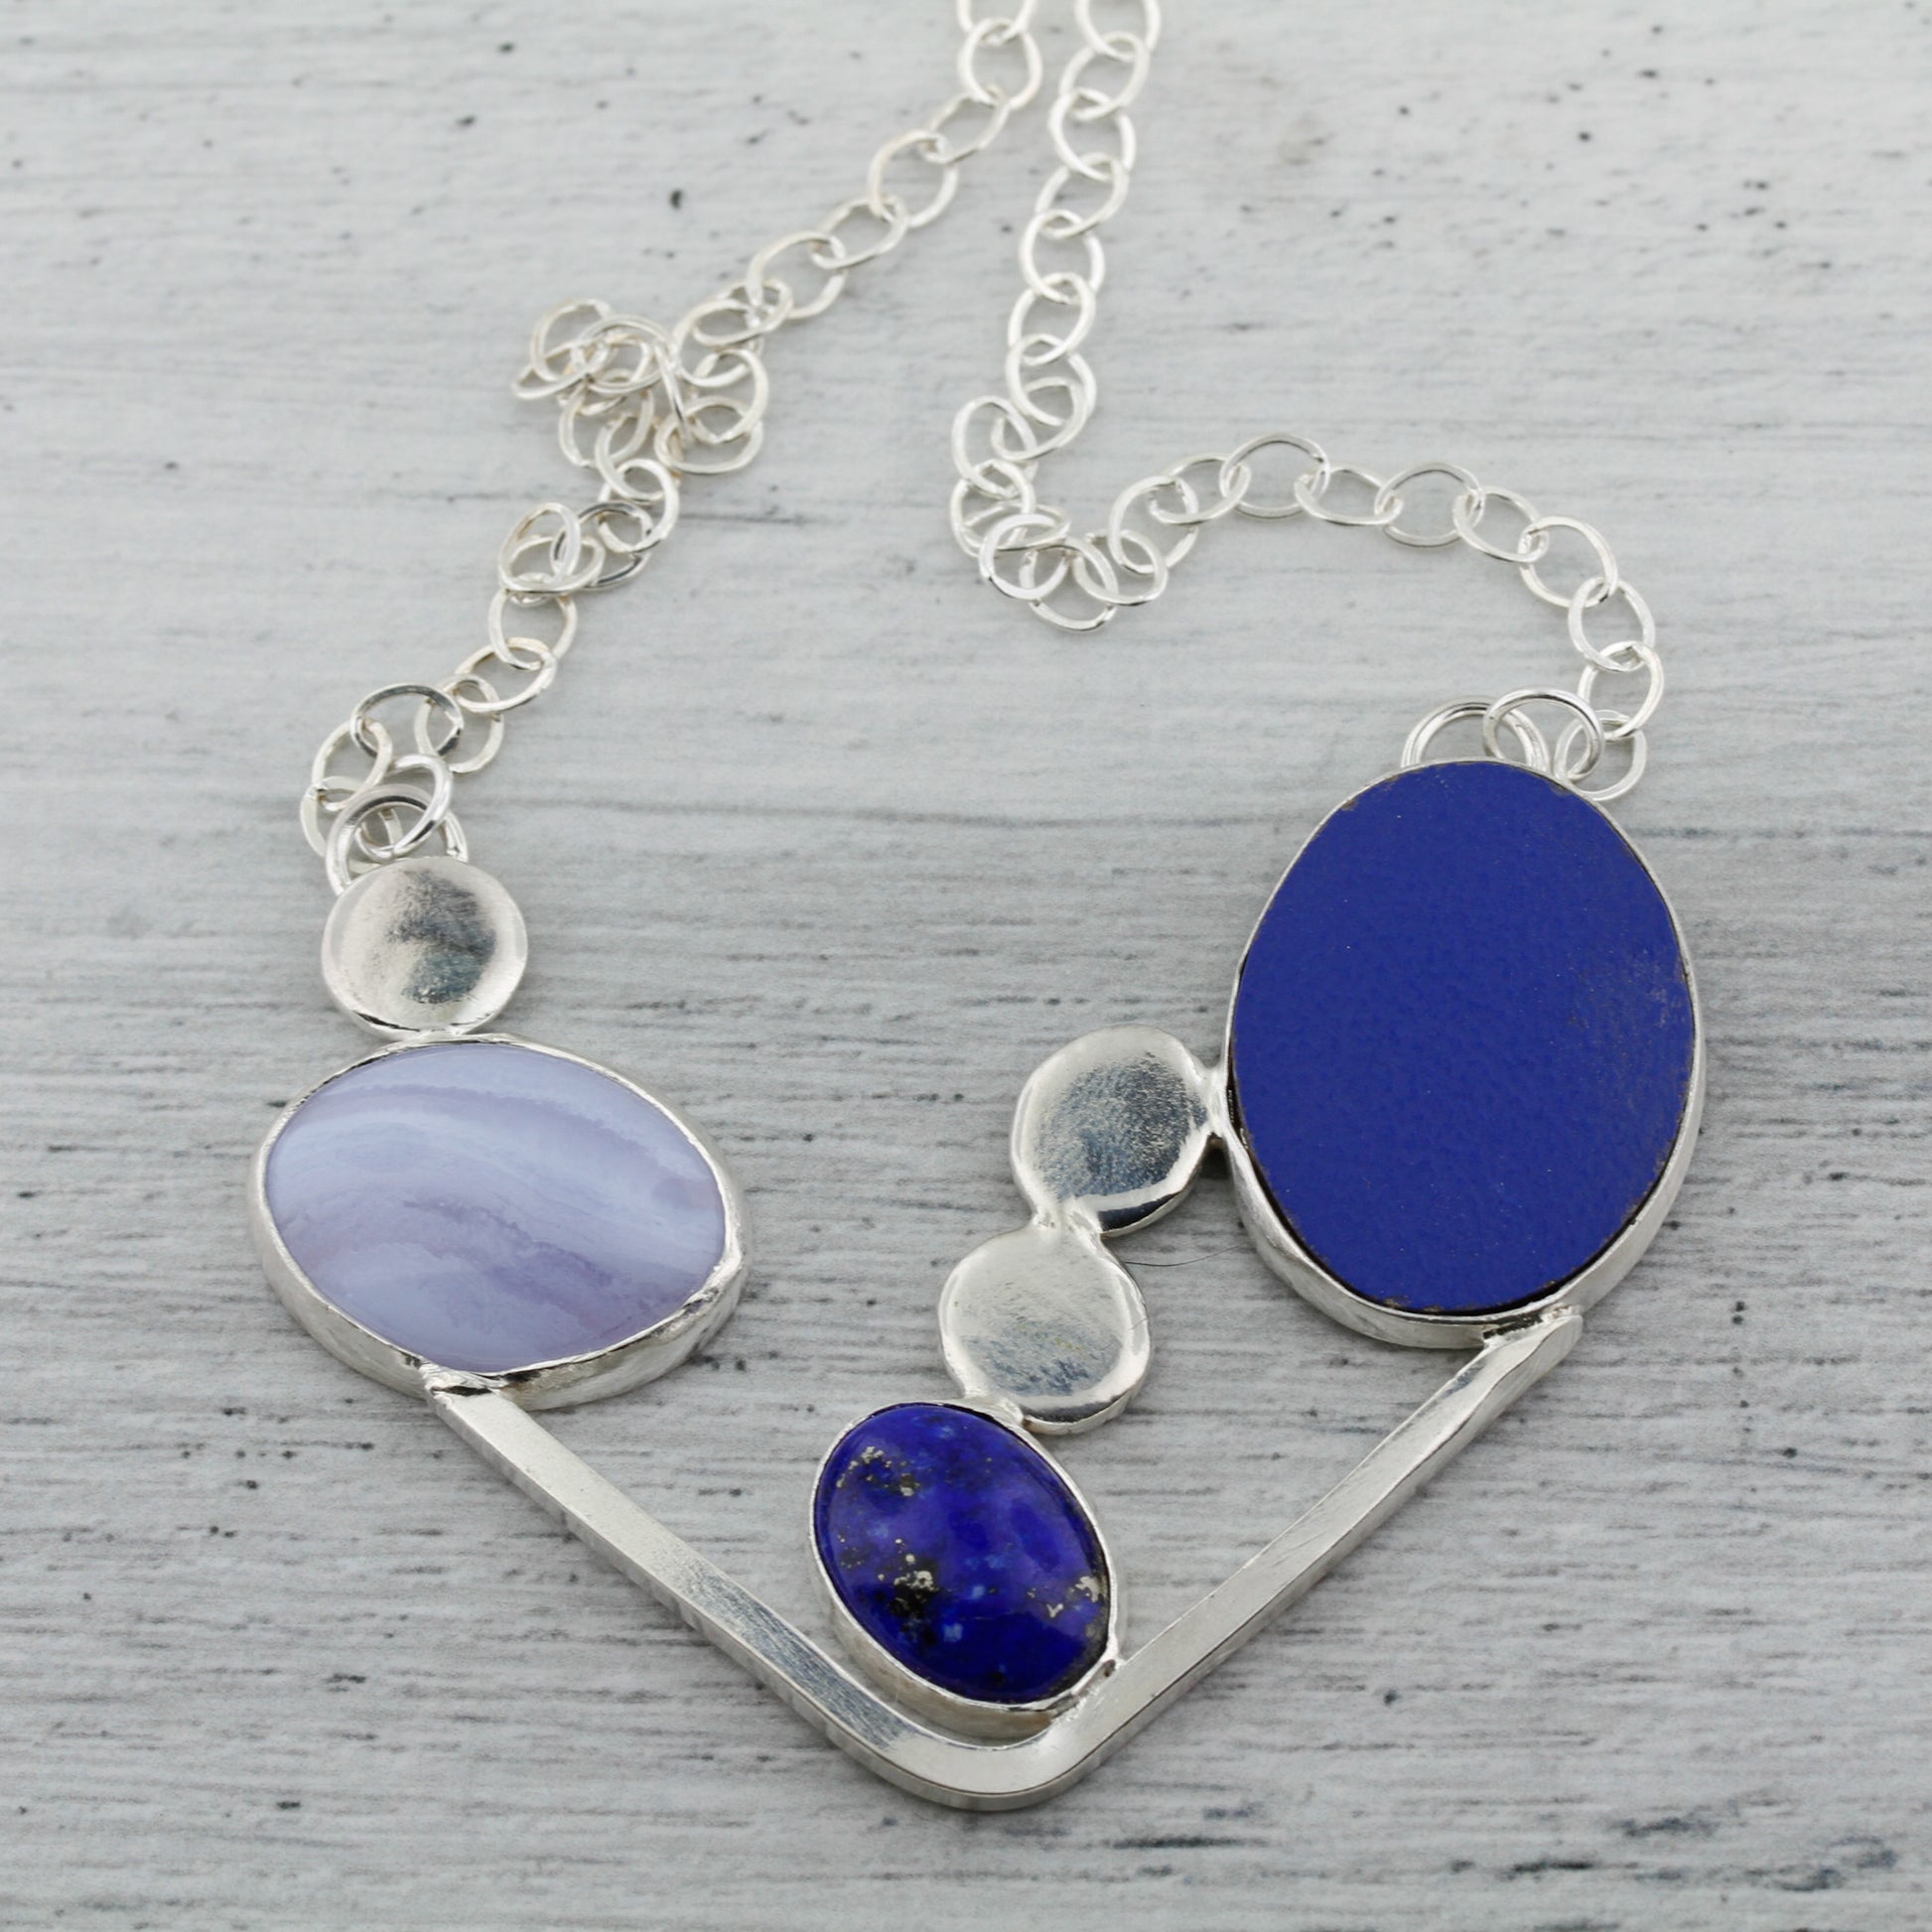 Blue lace agate, lapis lazuli, and laminate on wood modernist abstract necklace.